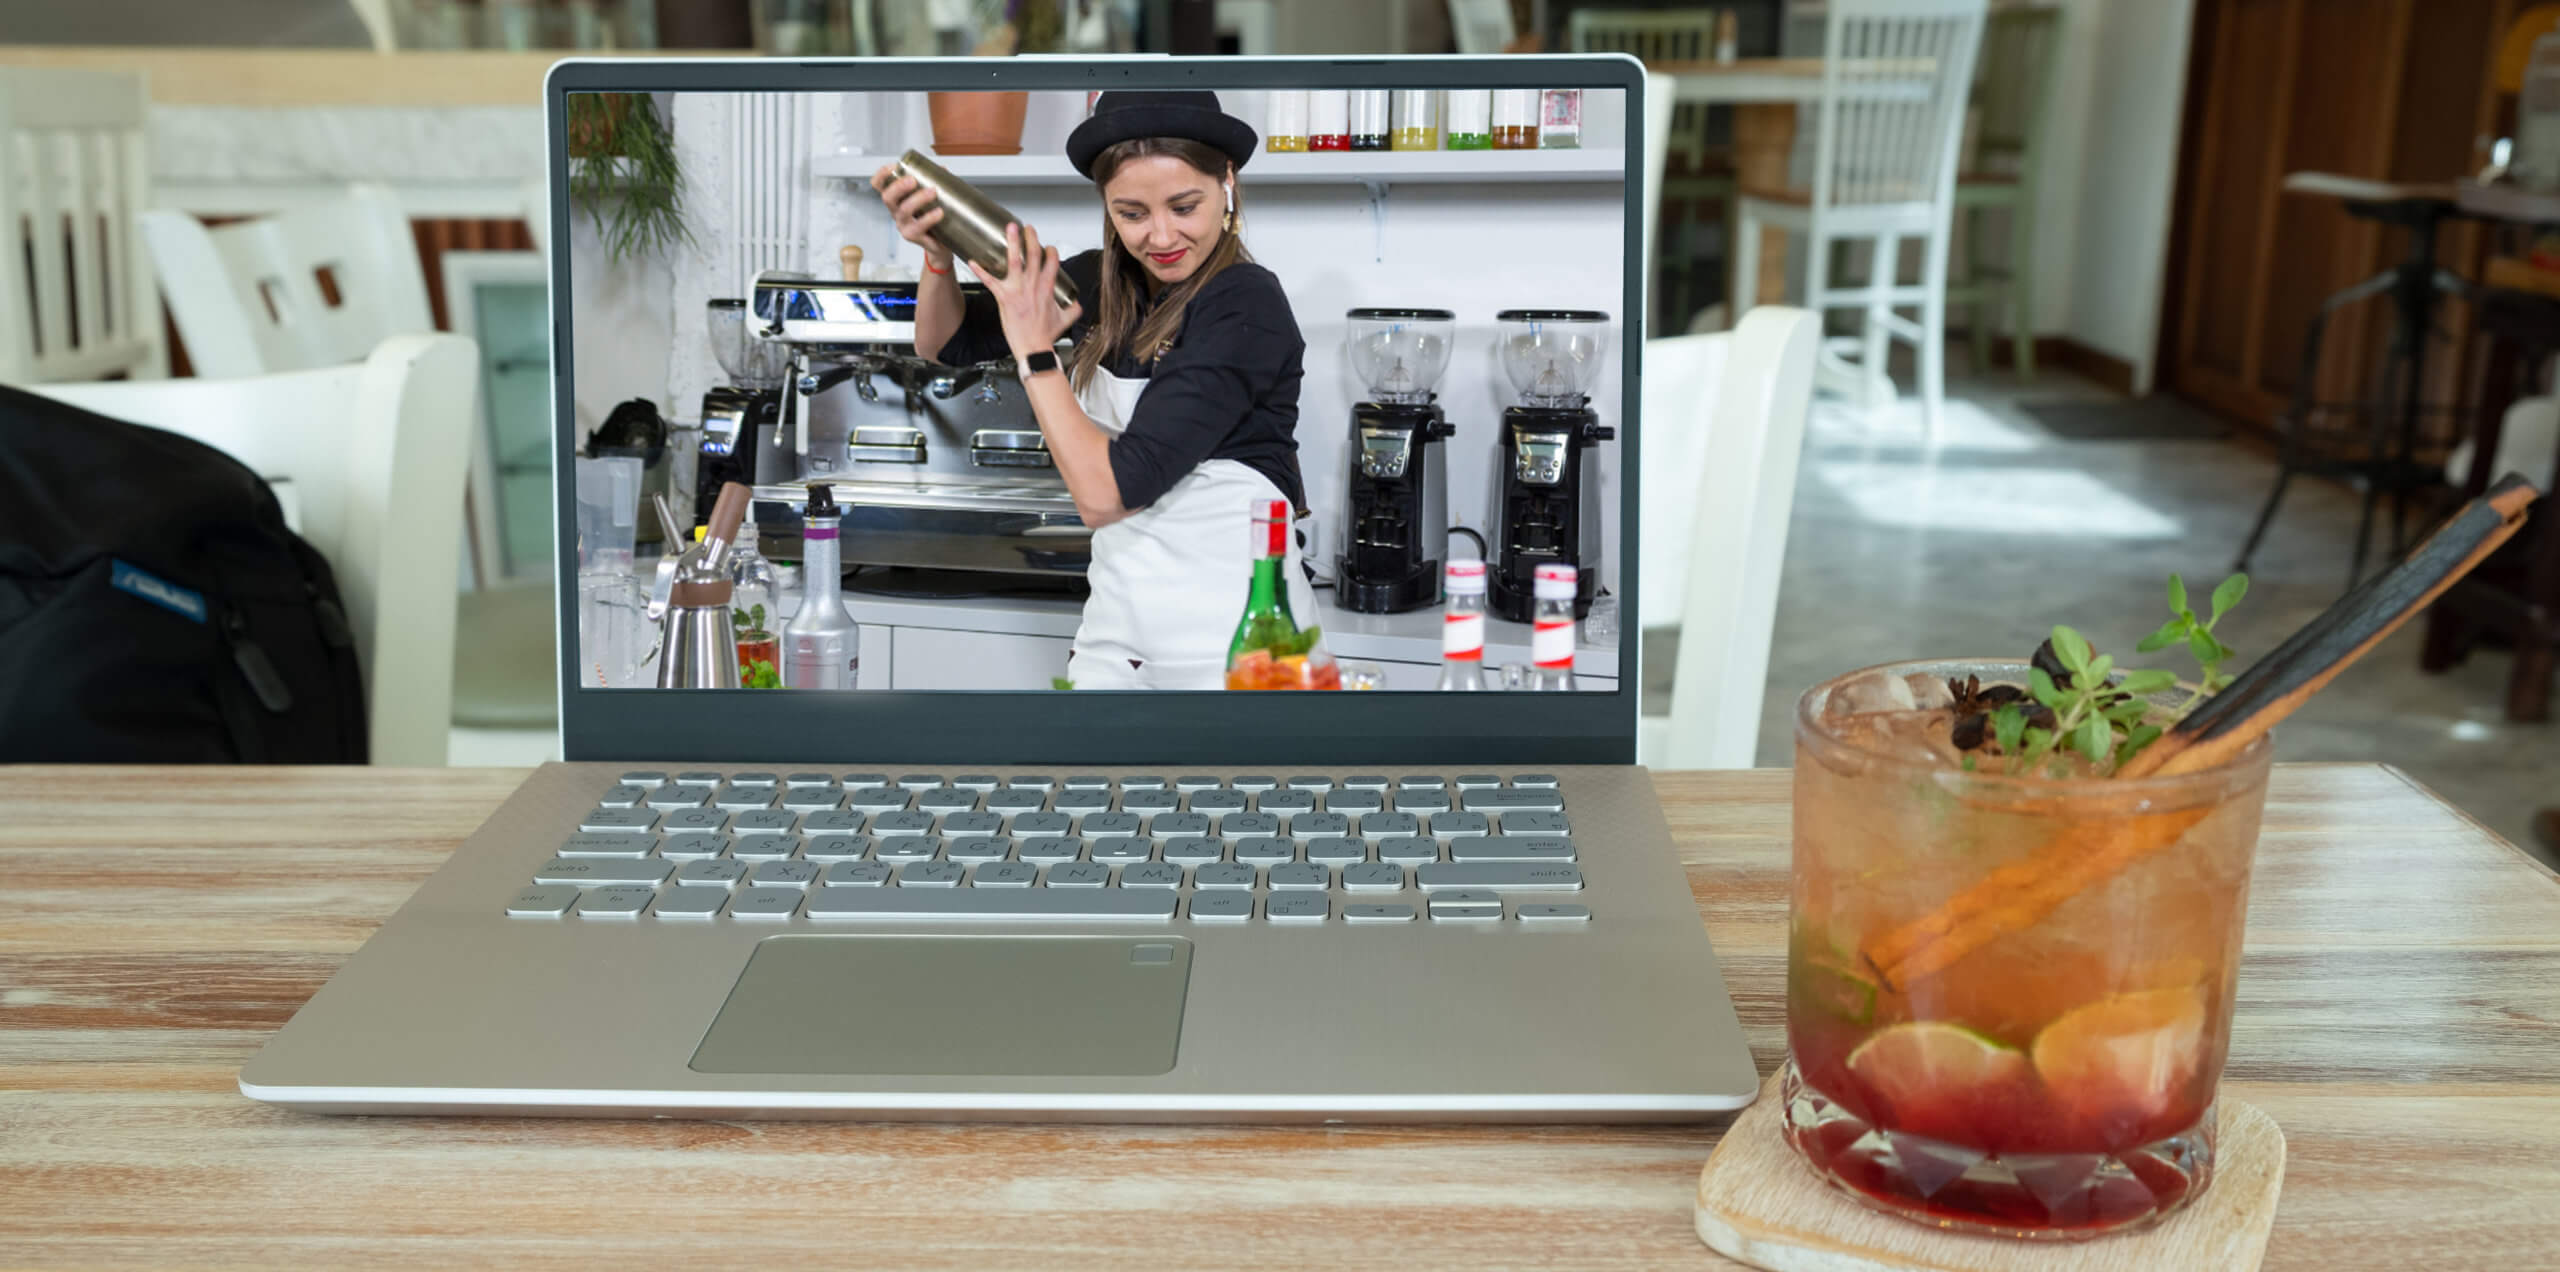 Mixology and Virtual Happy Hour